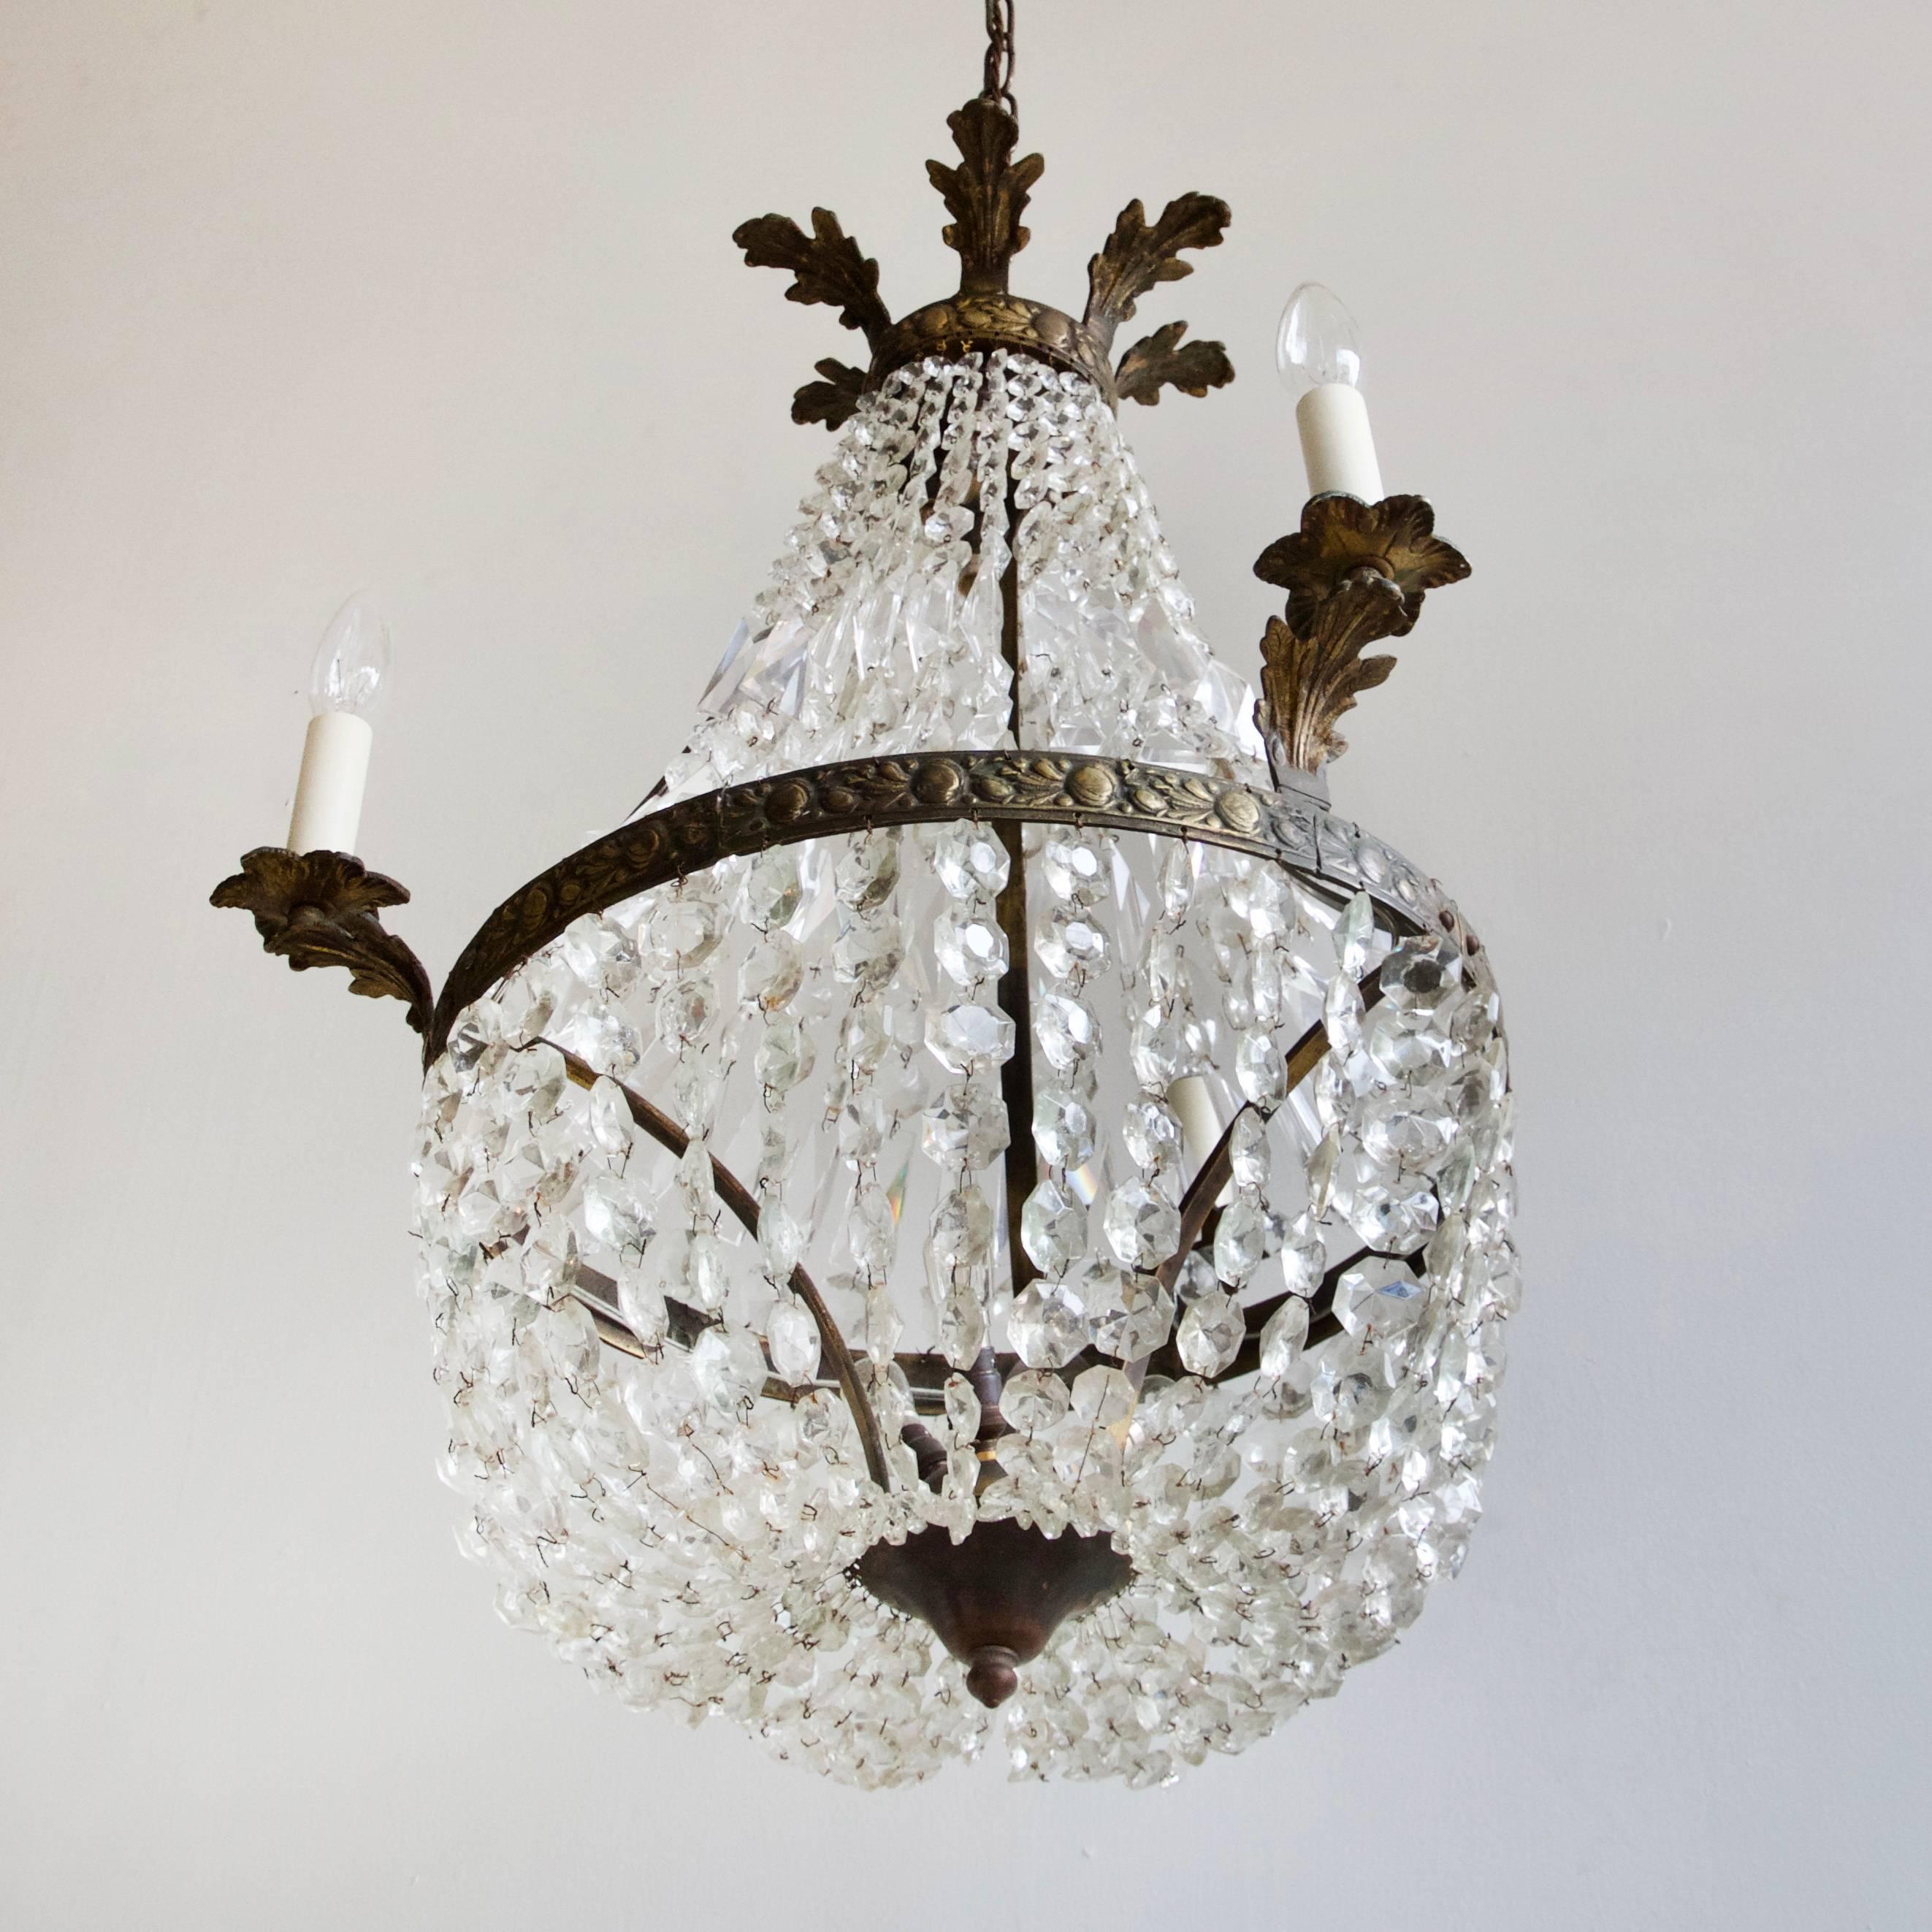 This balloon chandelier originates from early 1900s France. A tent of swags made from glass coffin lids and glass buttons forms the central body of the chandelier. Beneath the outer lamps more glass button swags drape to form the lower balloon. The